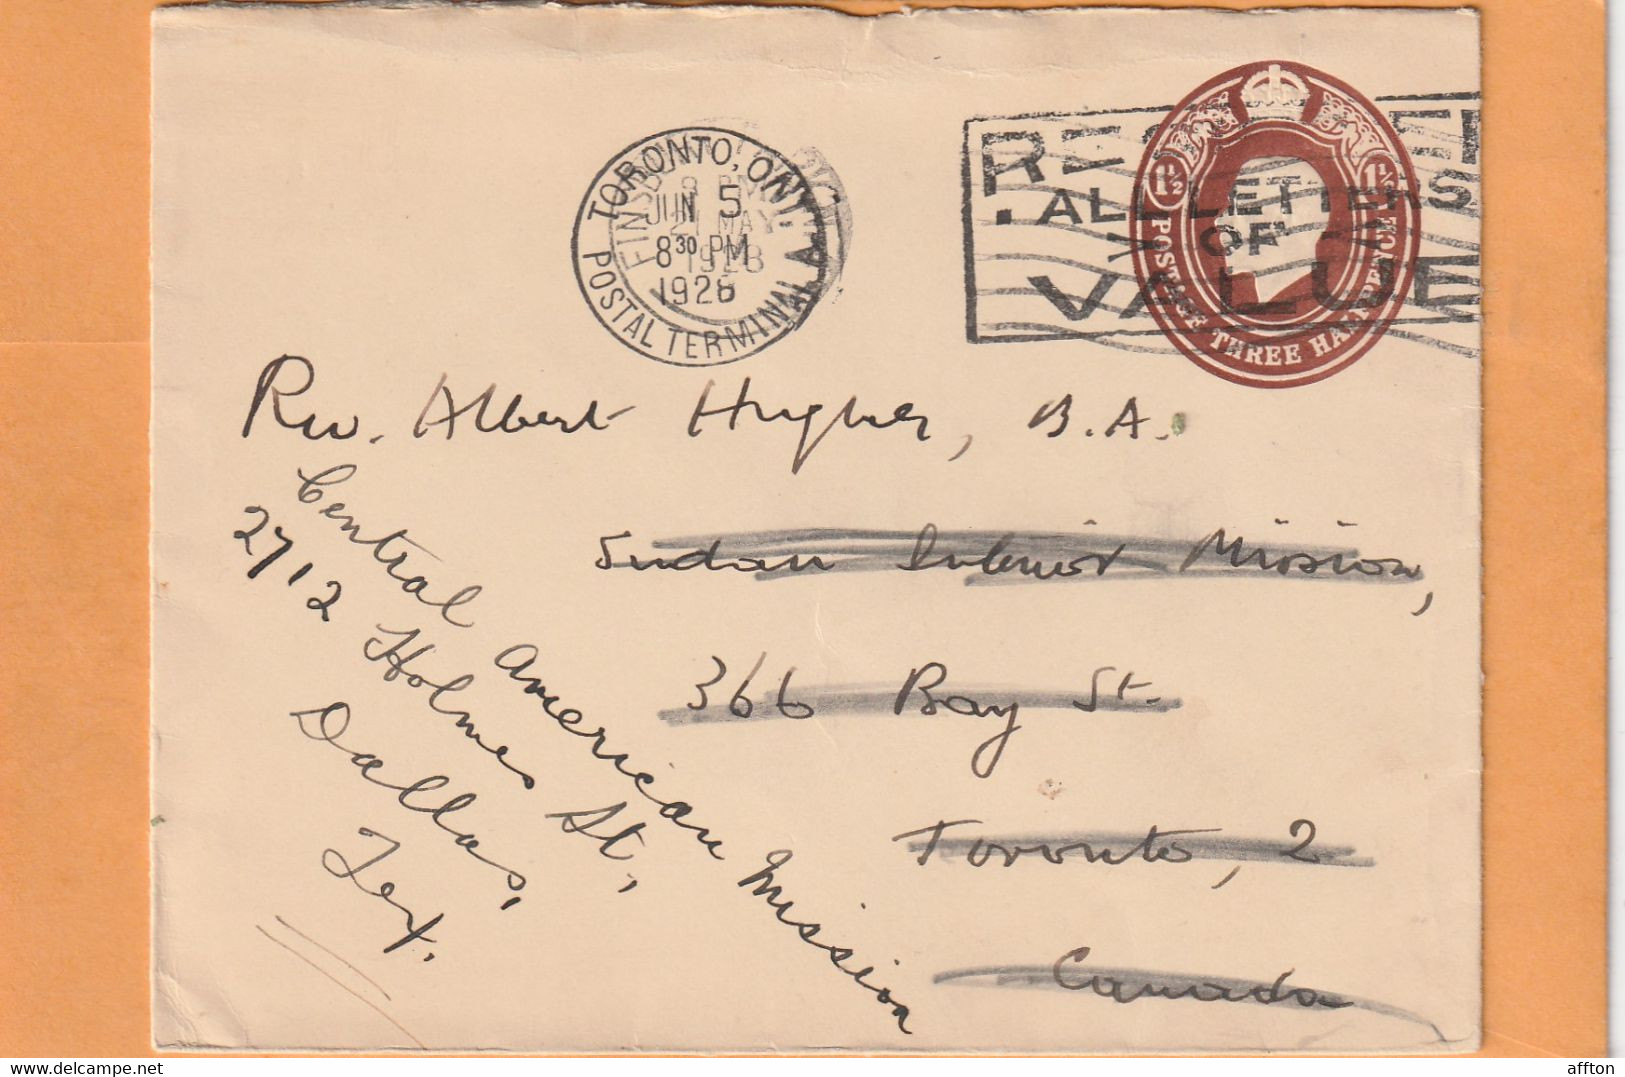 Canada Old Cover Mailed - 1903-1954 Reyes